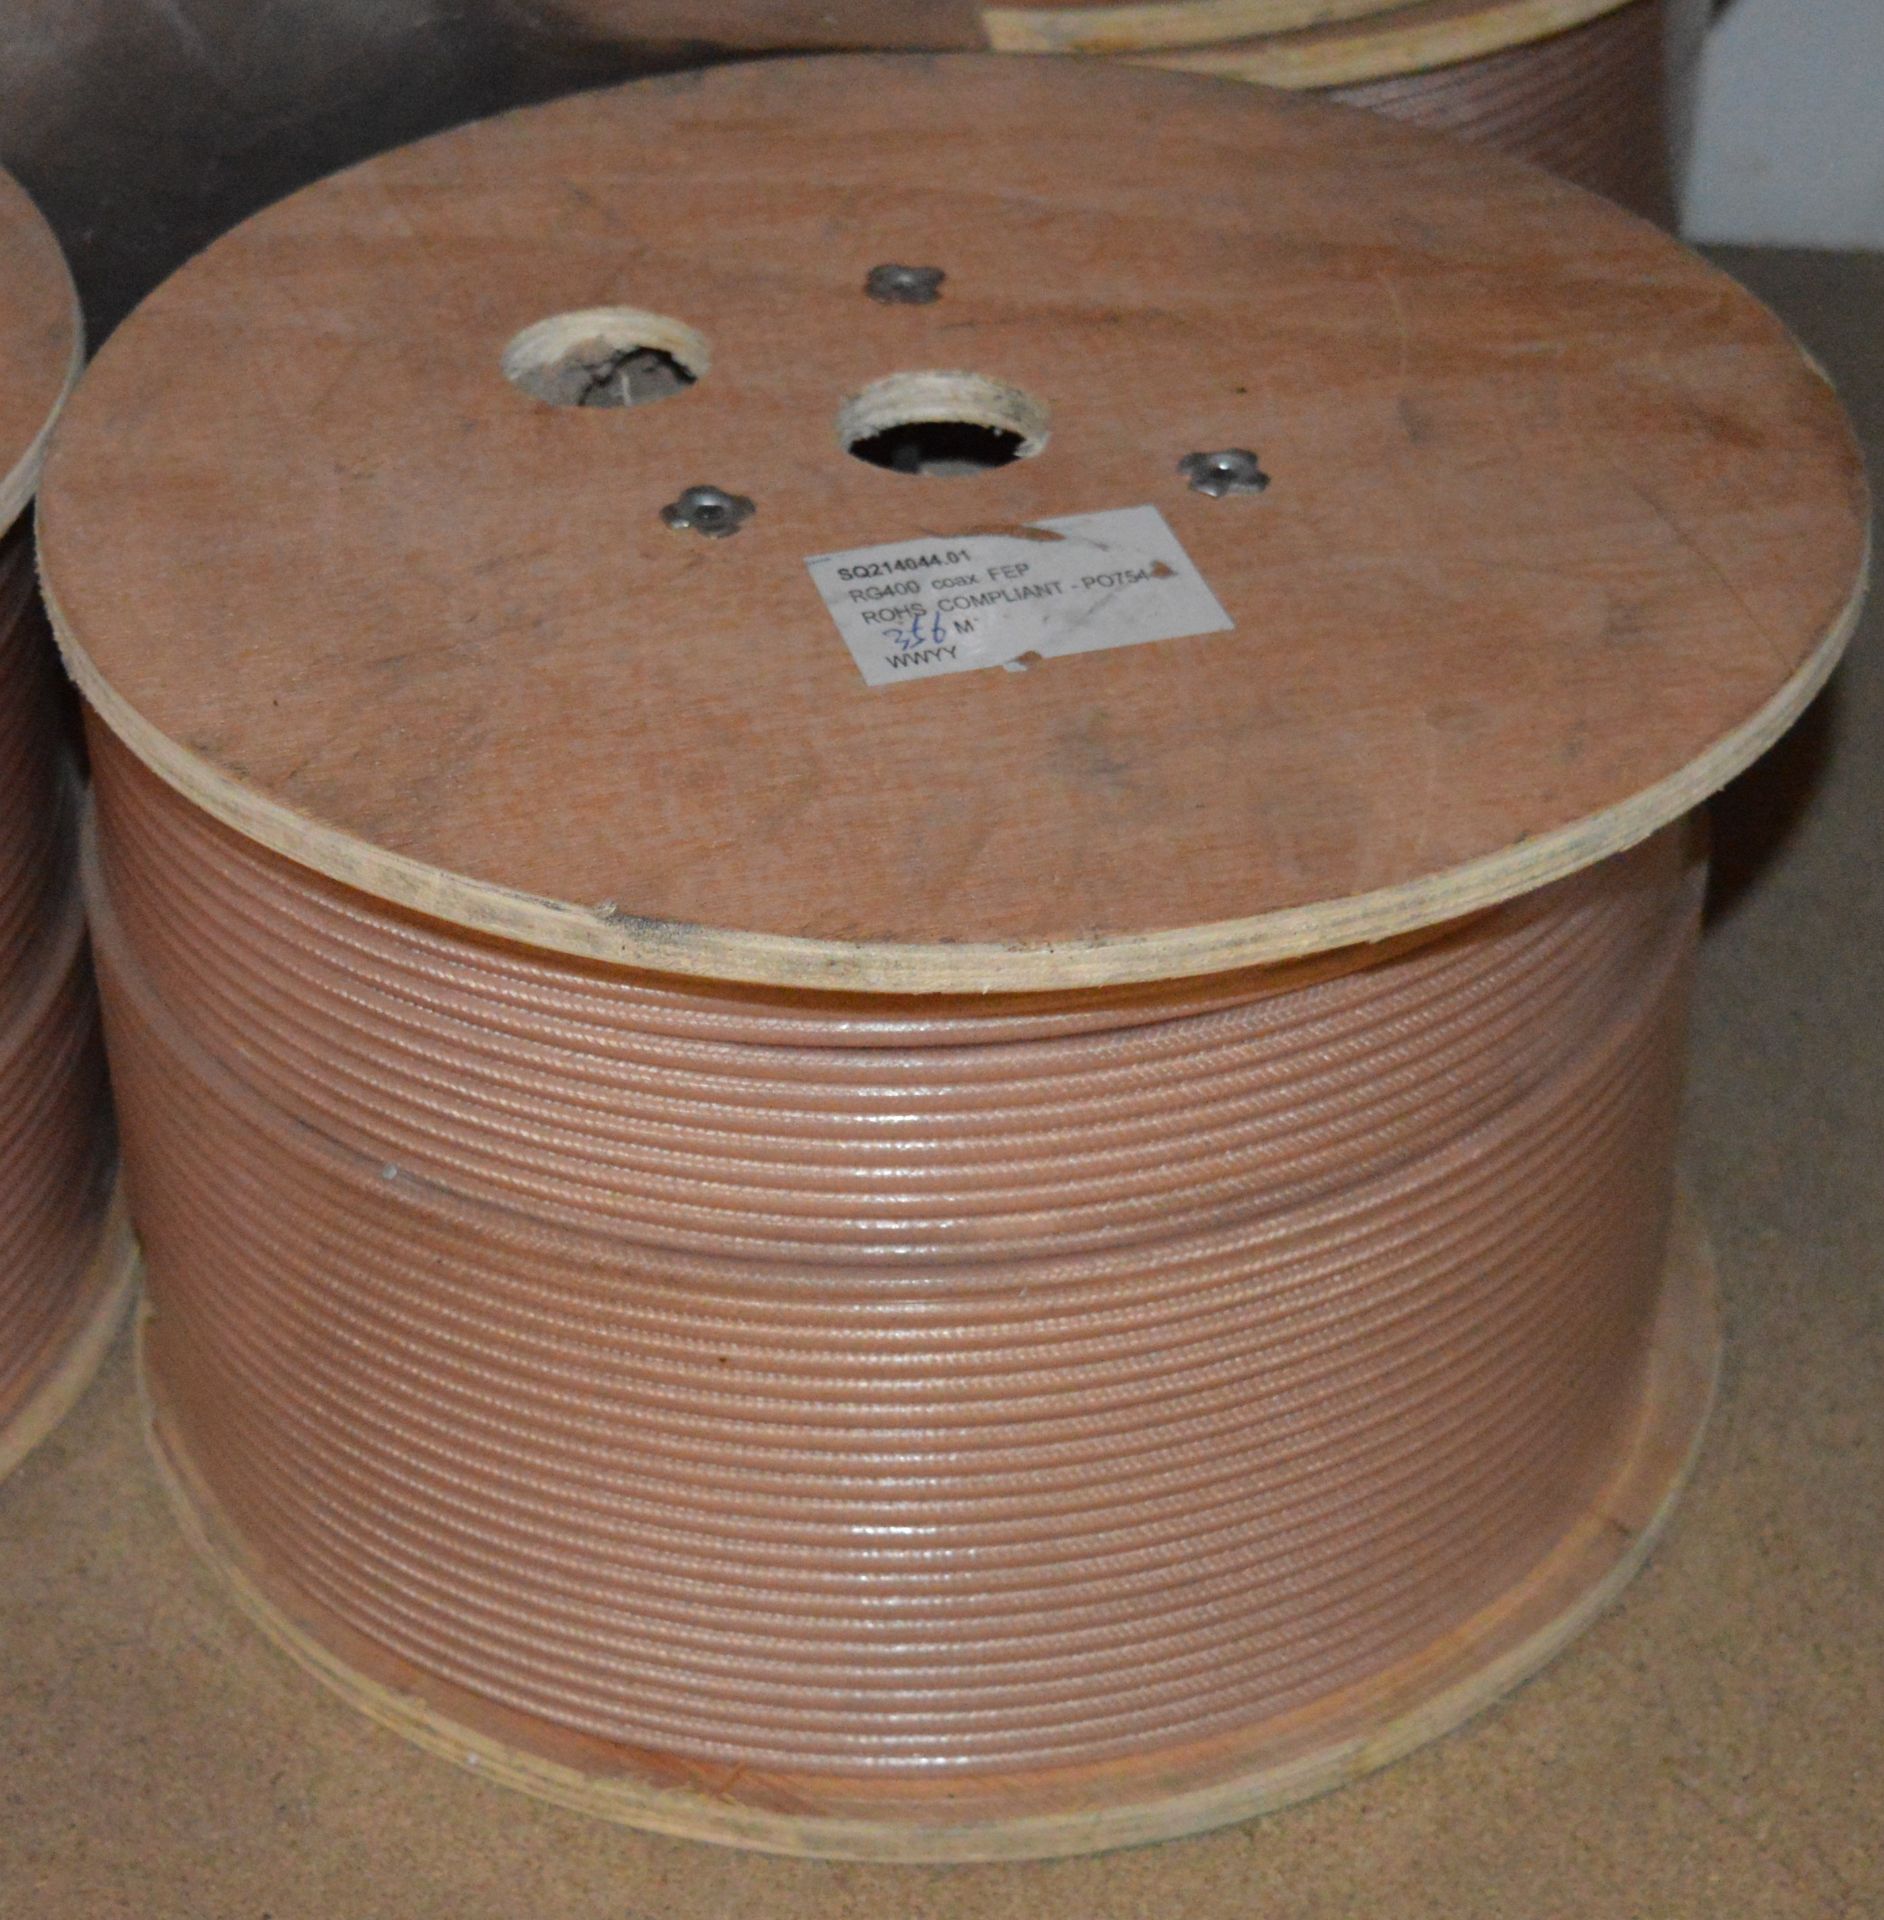 356 x Meter Reel RG400 Coax FEP Cable - Brand New Stock - ROHS Compliant - Brand New Stock - CL300 - - Image 5 of 5